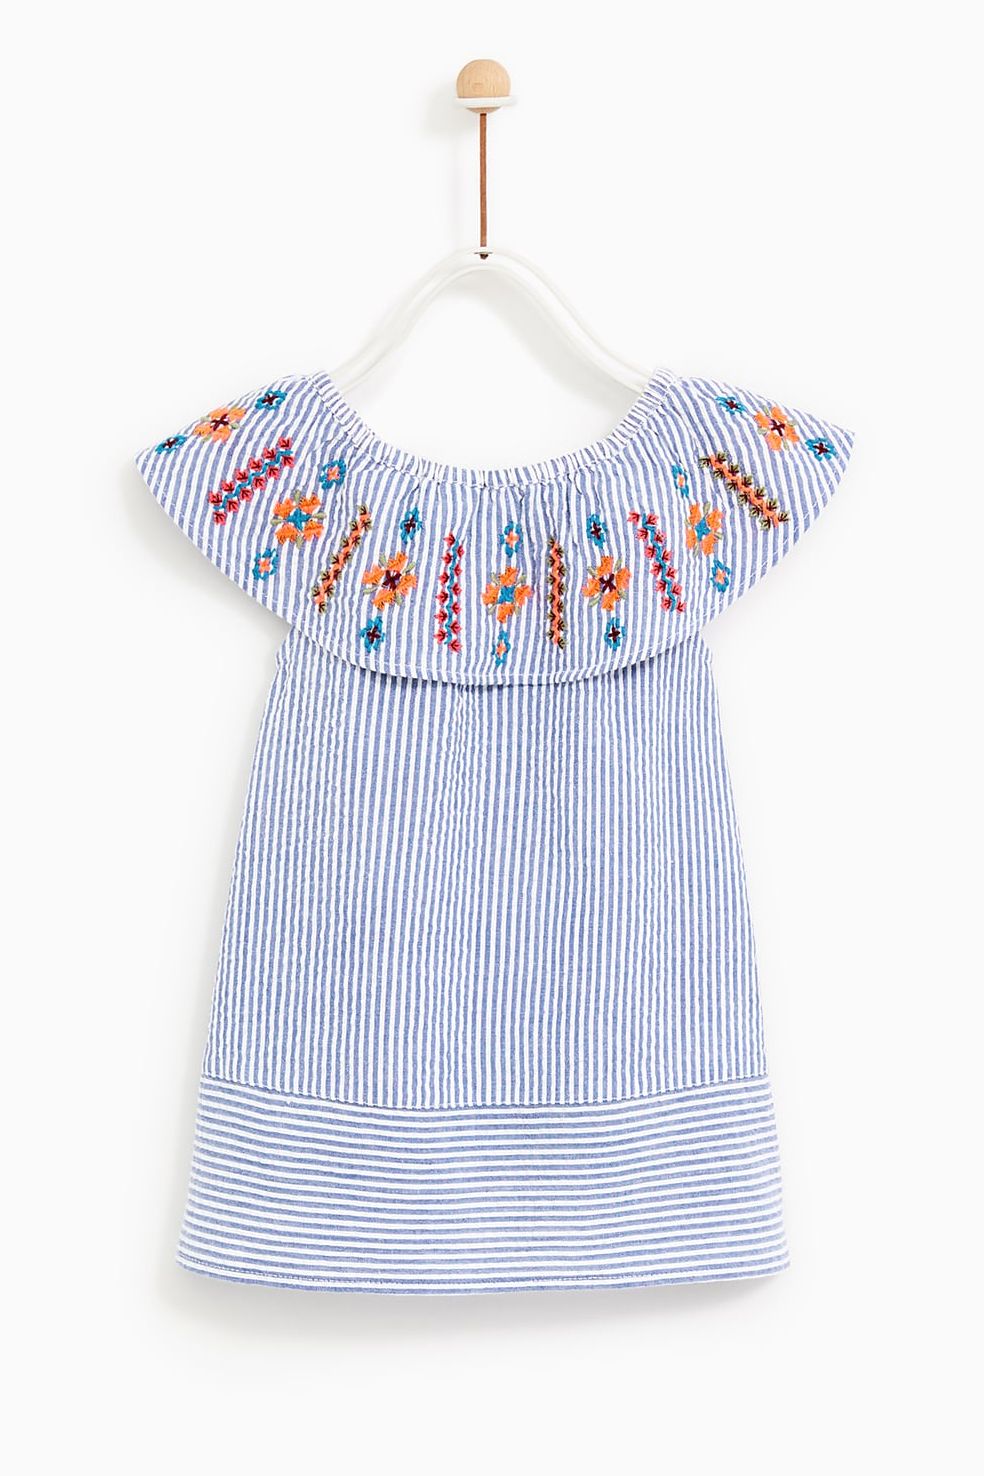 zara baby outfit